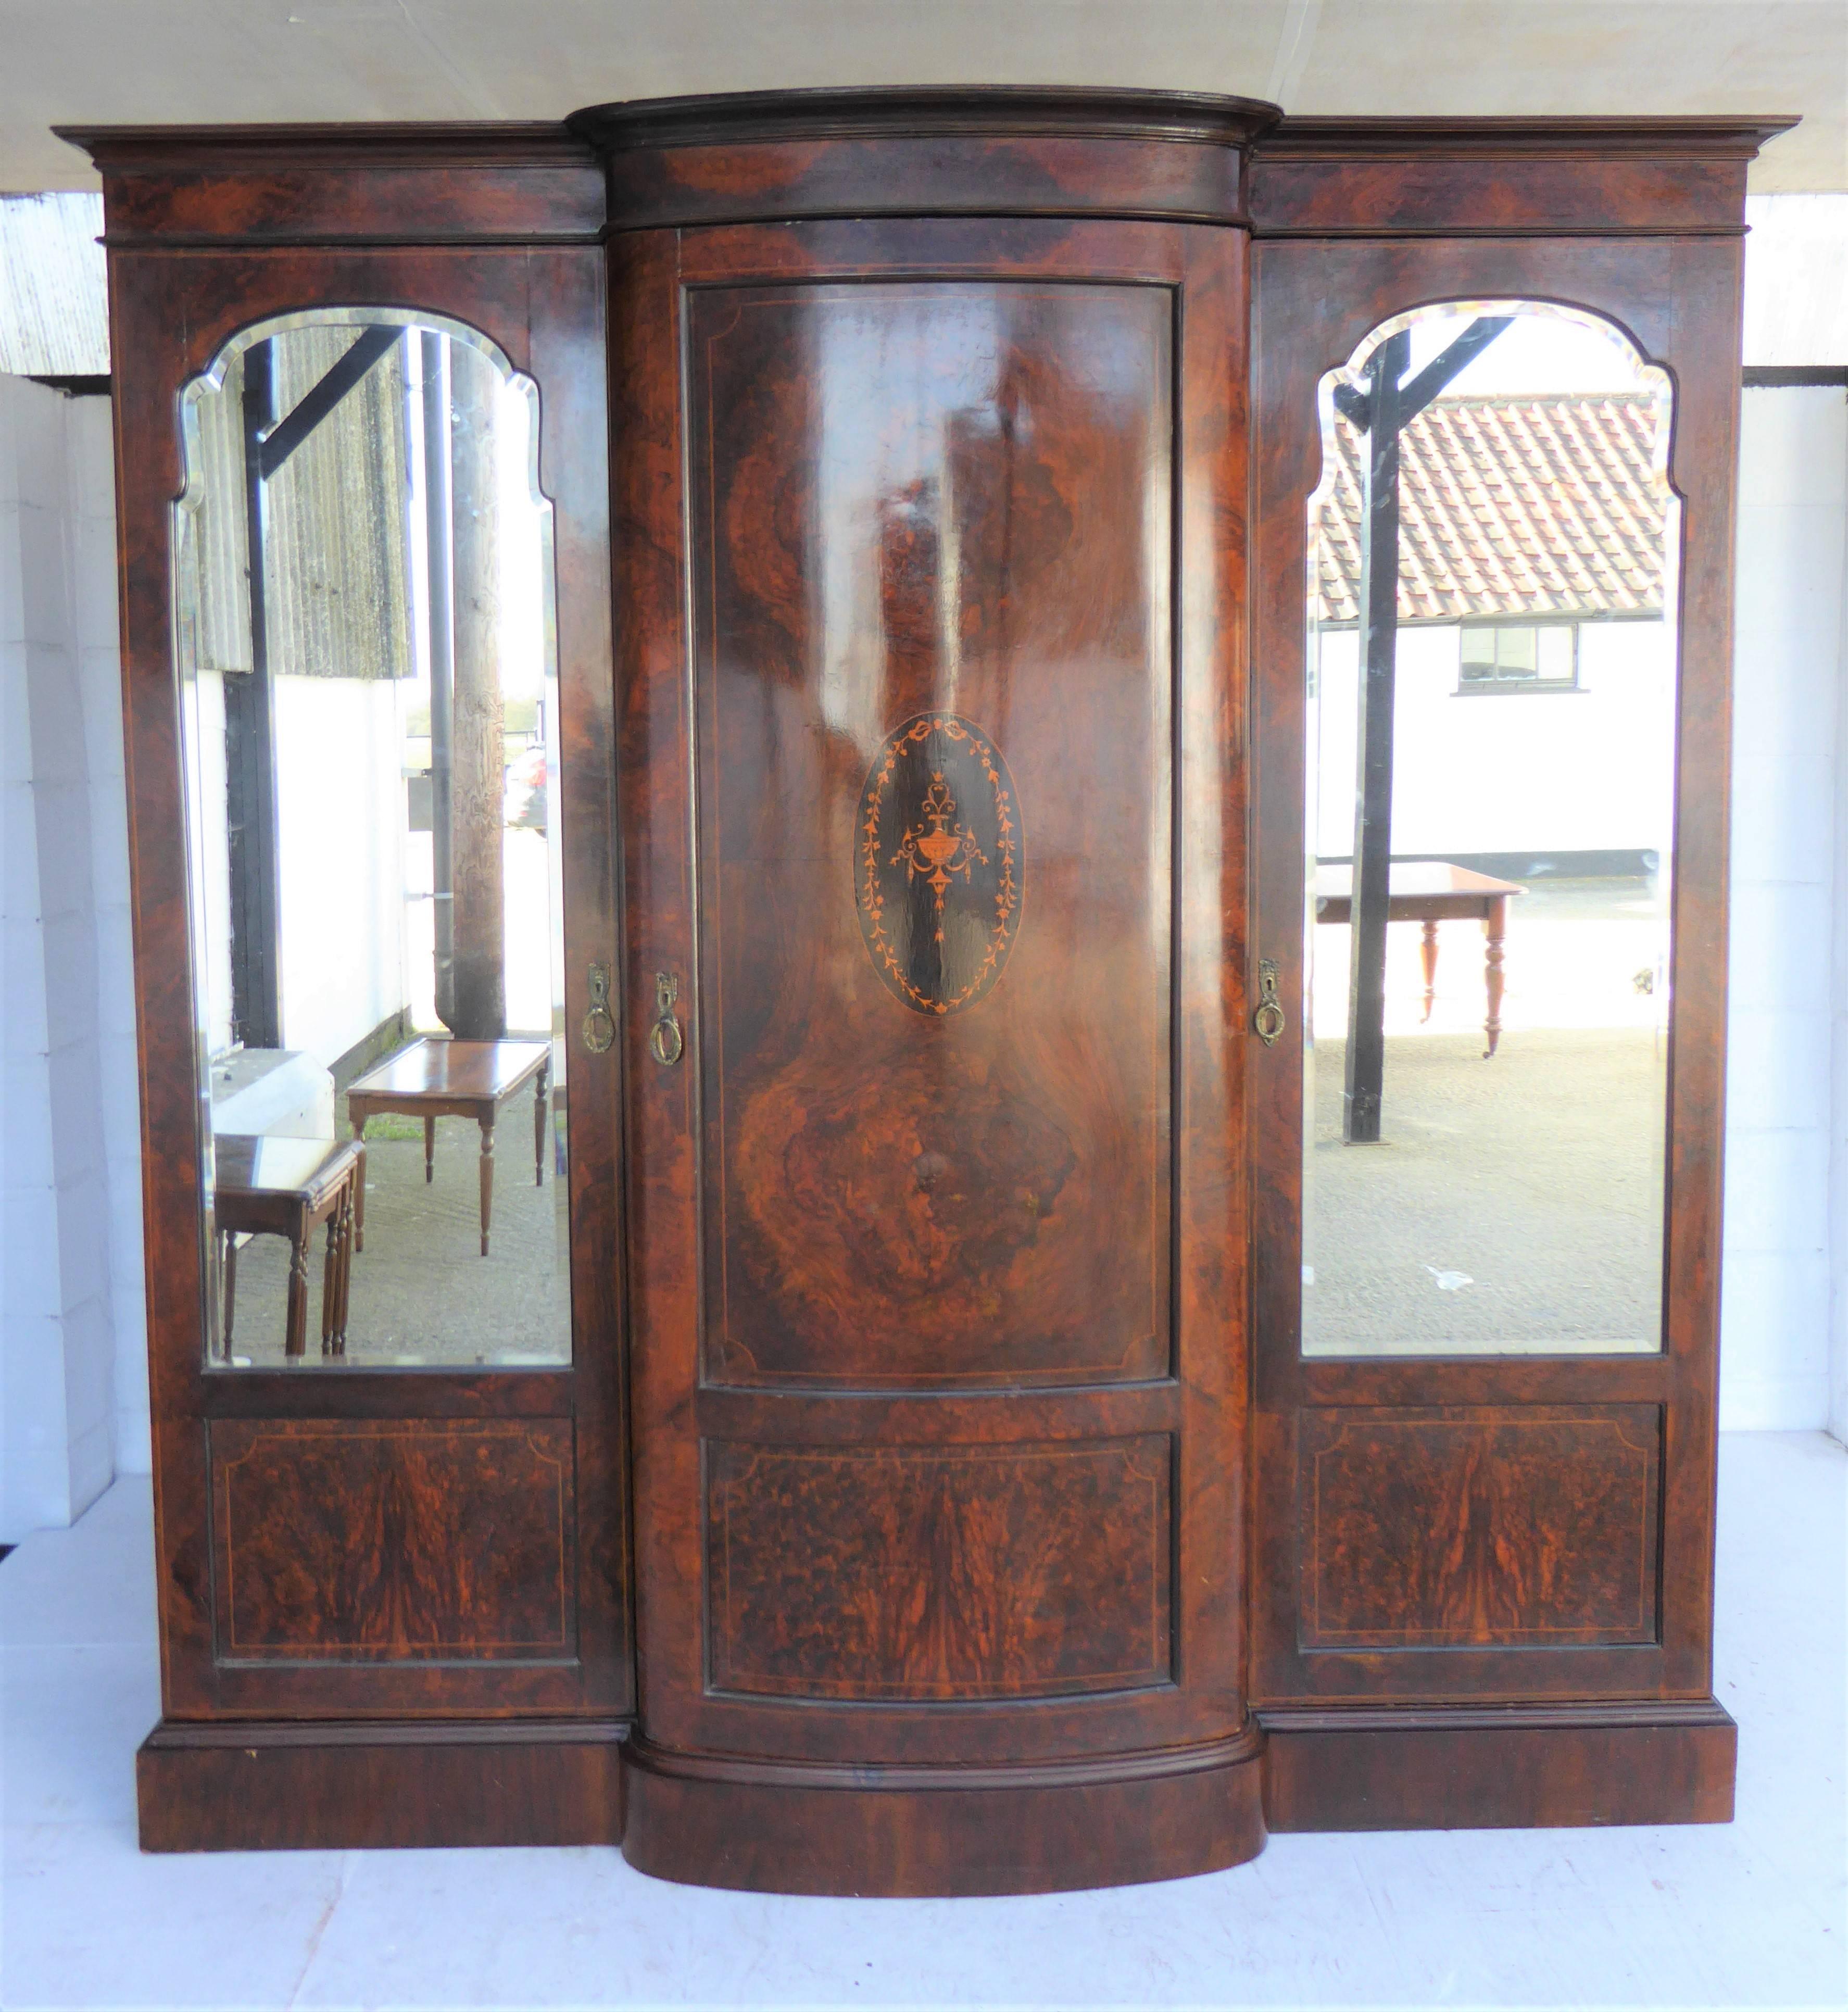 Late Victorian Burr Walnut Inlaid Triple door Wardrobe linen press compactum in original condition. Raised on a plinth base with central Inlaid bowfronted door flanked by bevelled mirror doors.The right and  left hand side encloses shelf over